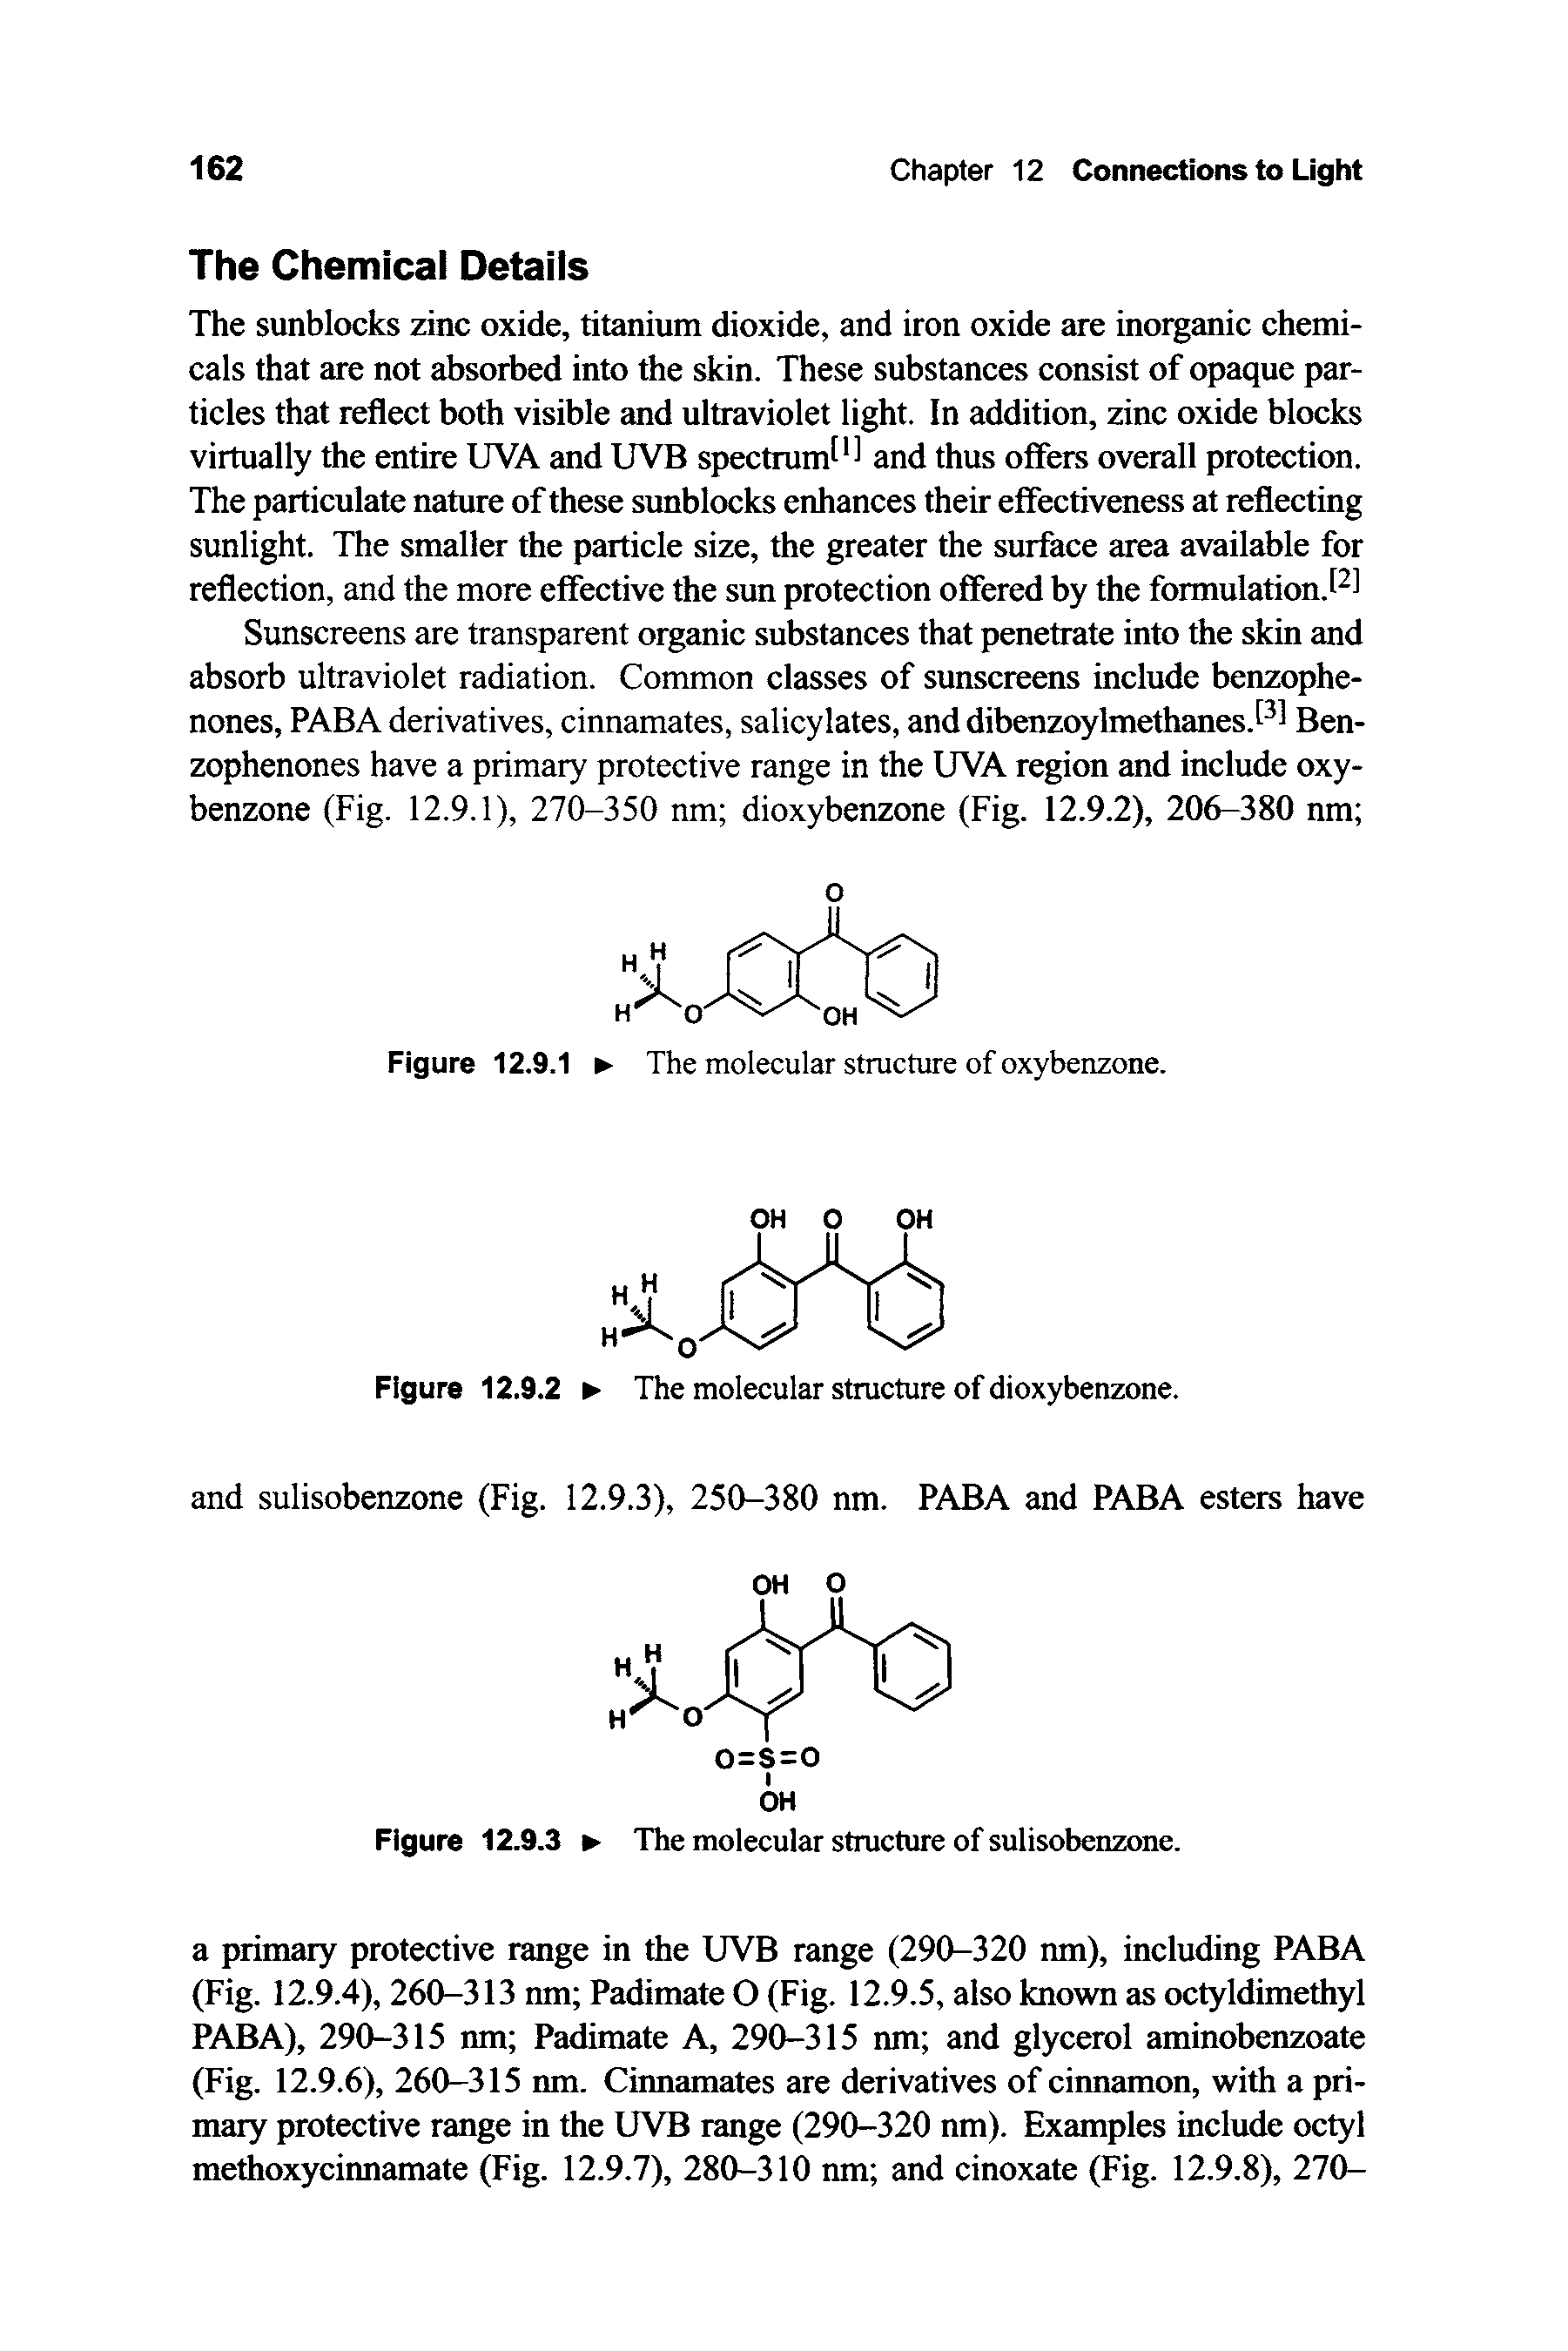 Figure 12.9.2 The molecular structure of dioxybenzone. and sulisobenzone (Fig. 12.9.3), 250-380 nm. PABA and PABA esters have...